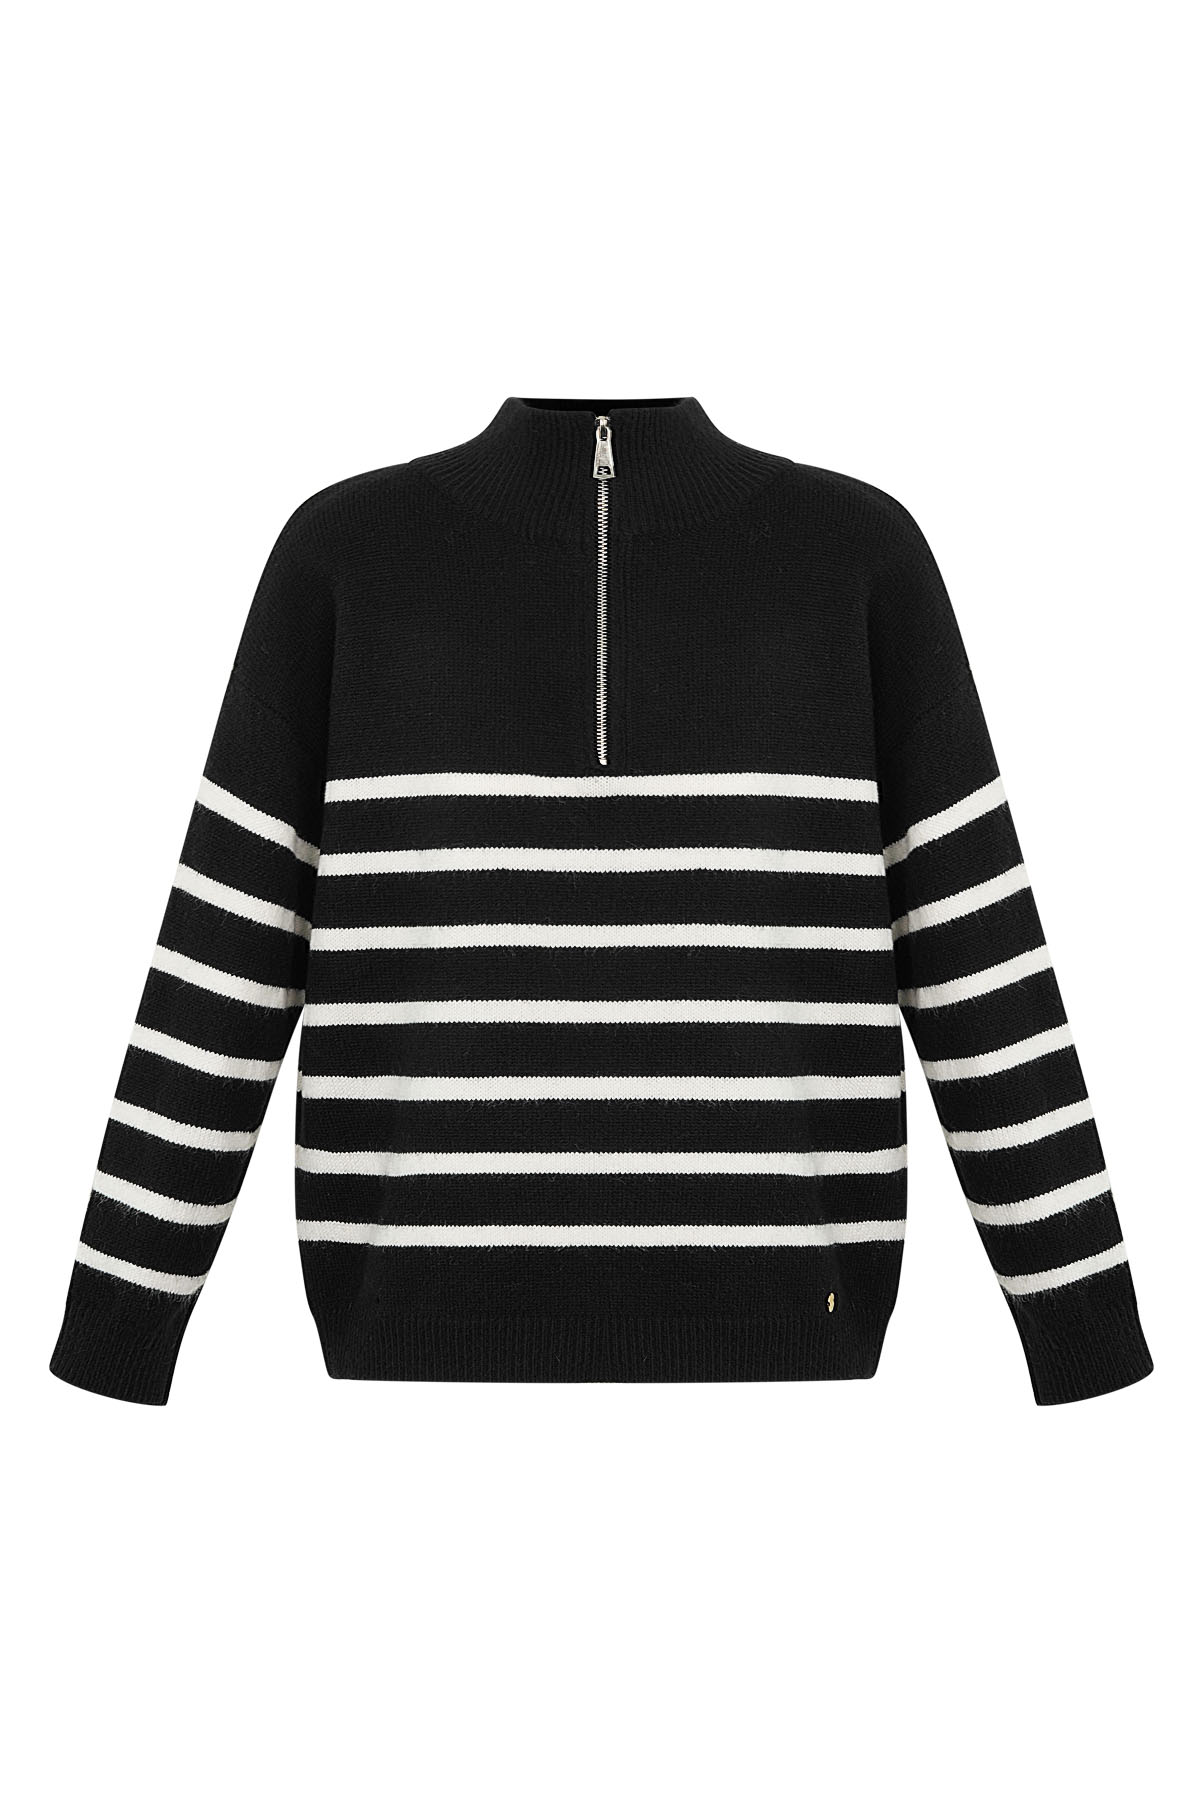 Knitted sweater stripes with zipper - beige black - LXL